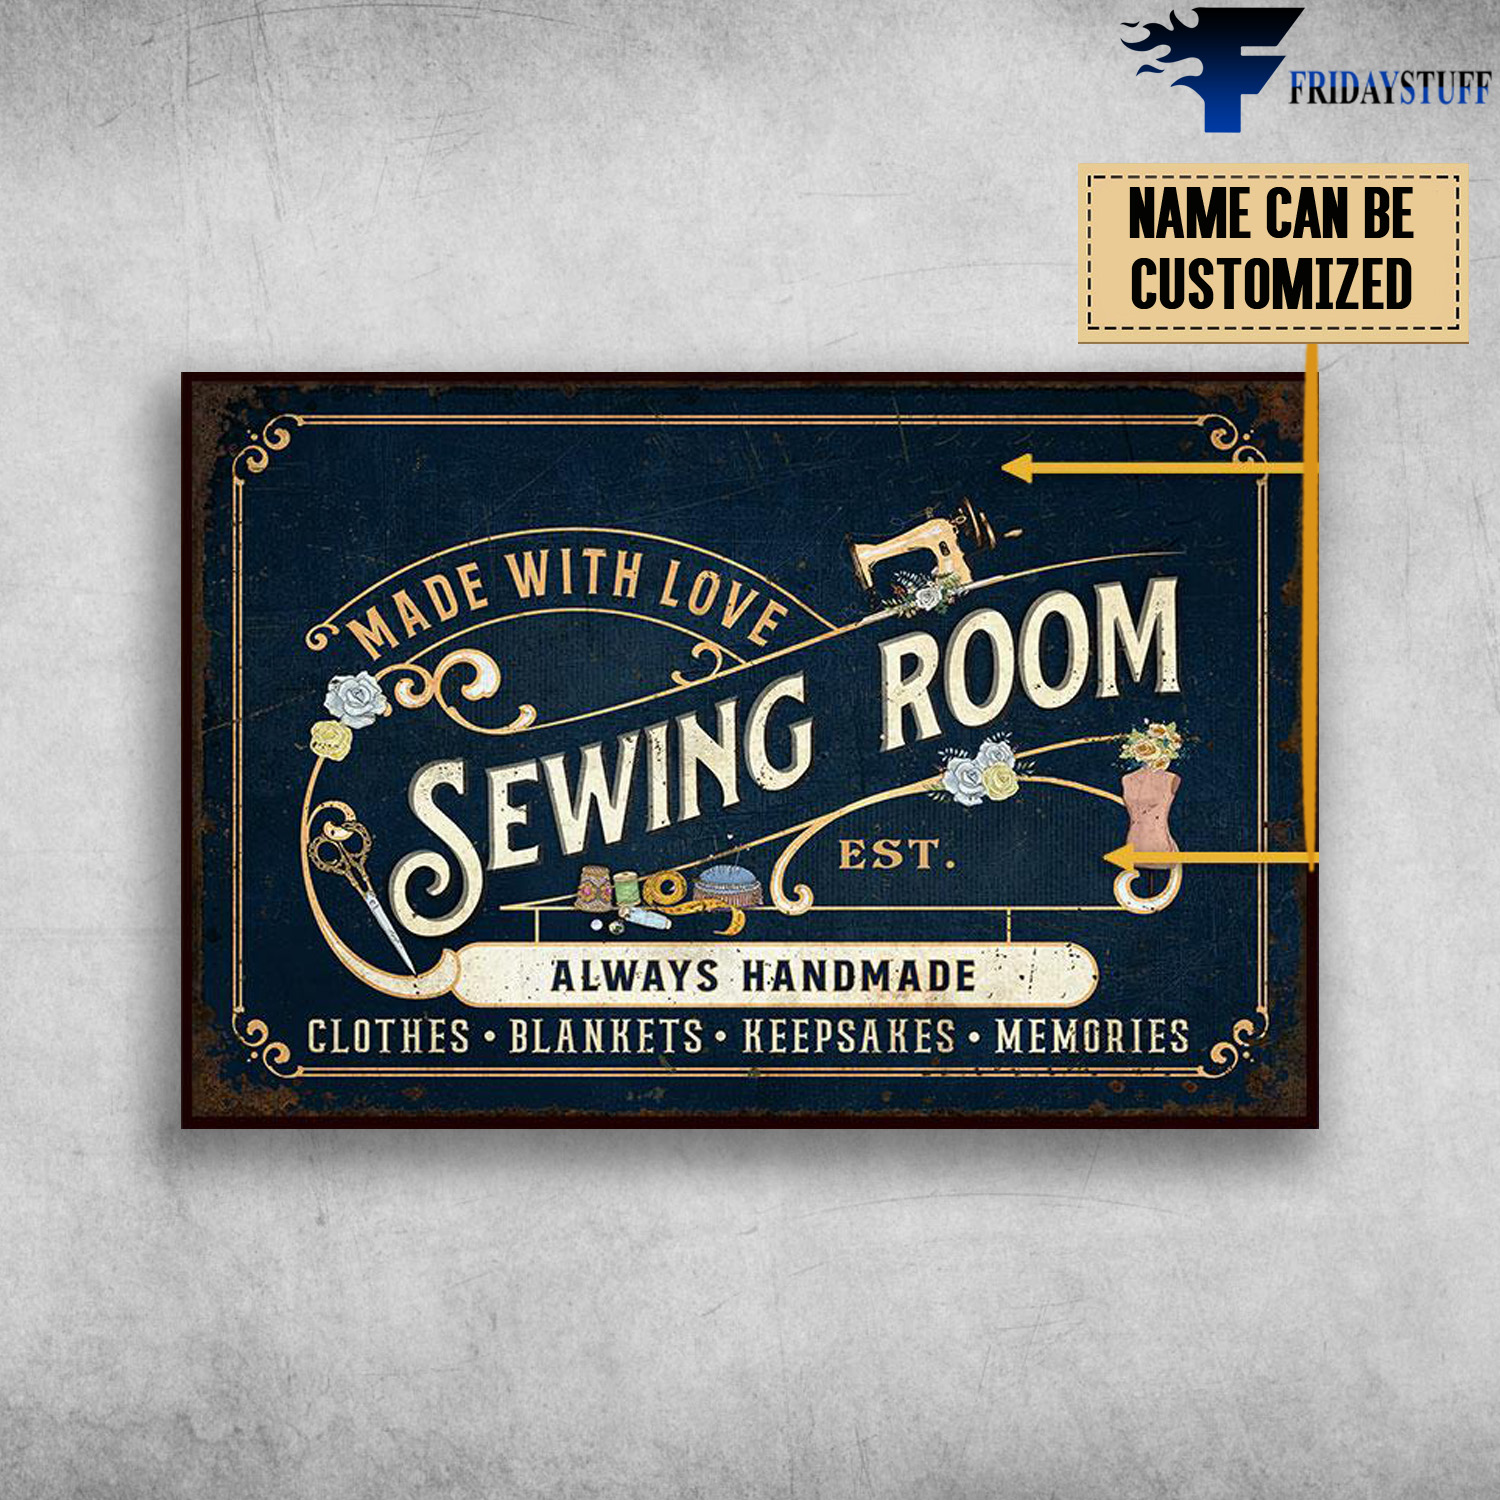 Personalized Sewing Room, Made With Love Customized Poster, Always Handmade. Clothes Blankets, Clother, Blankets, Keepsakes, Memories